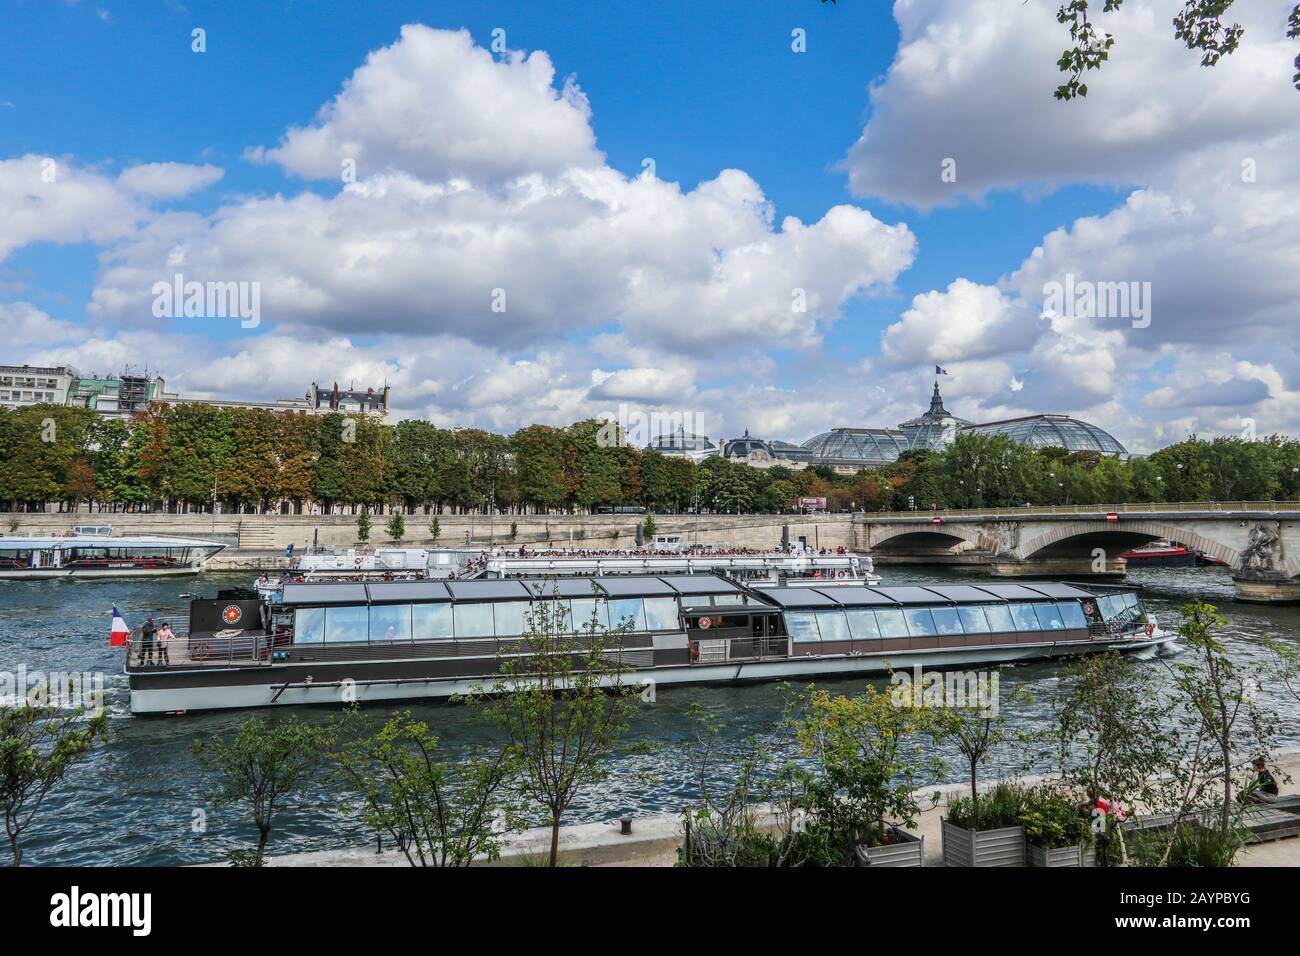 River cruise sightseeing boat in Paris, France, Europe Stock Photo